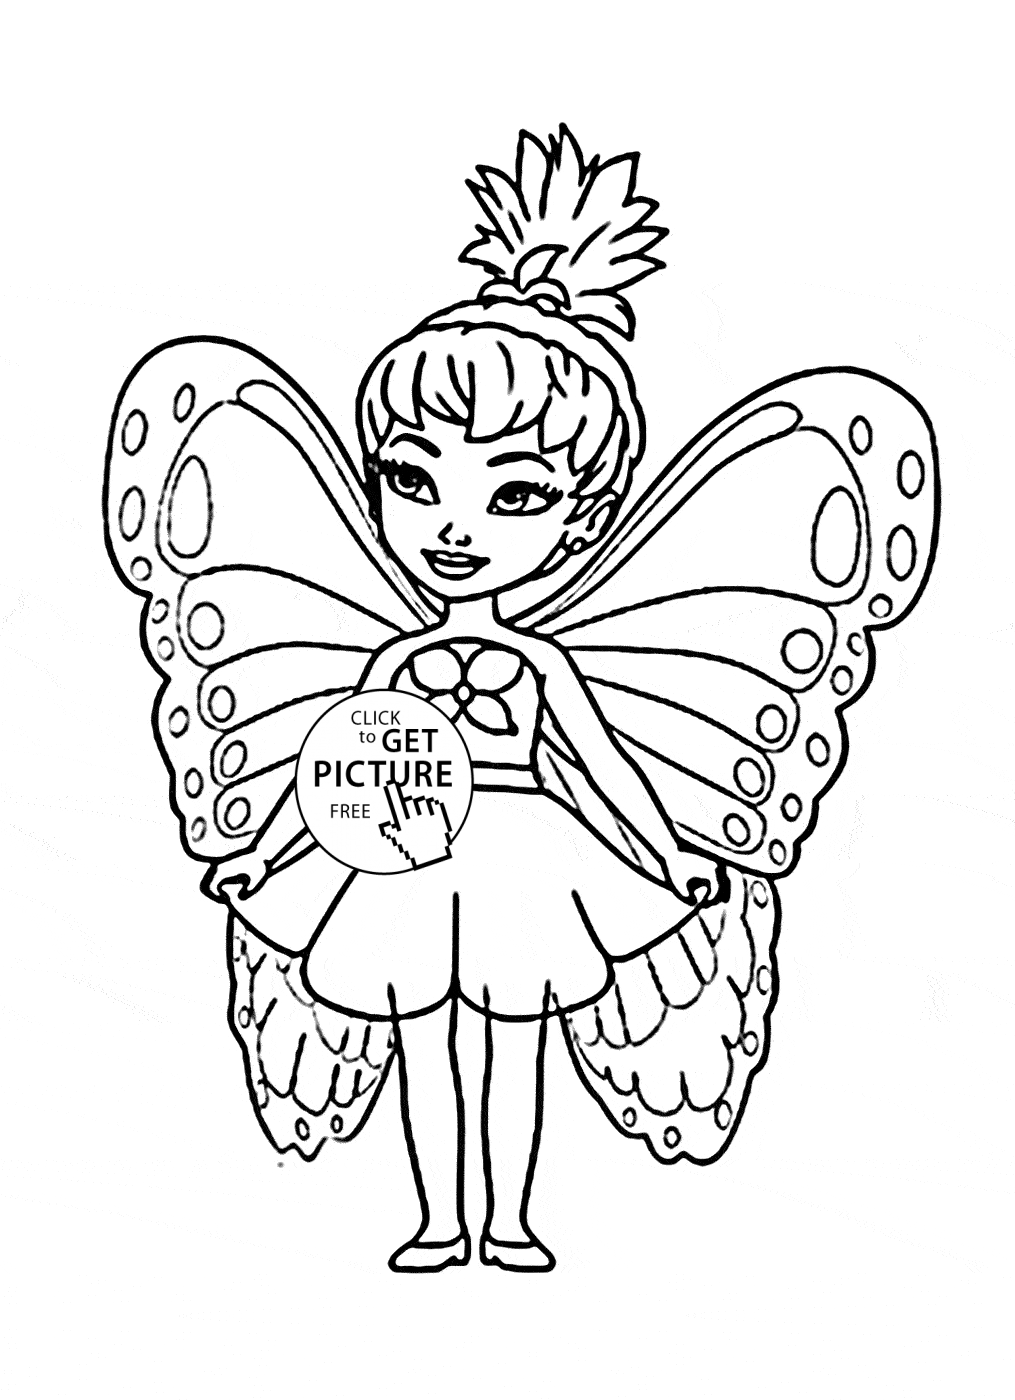 Cute Little Fairy coloring page for kids, for girls coloring pages ...